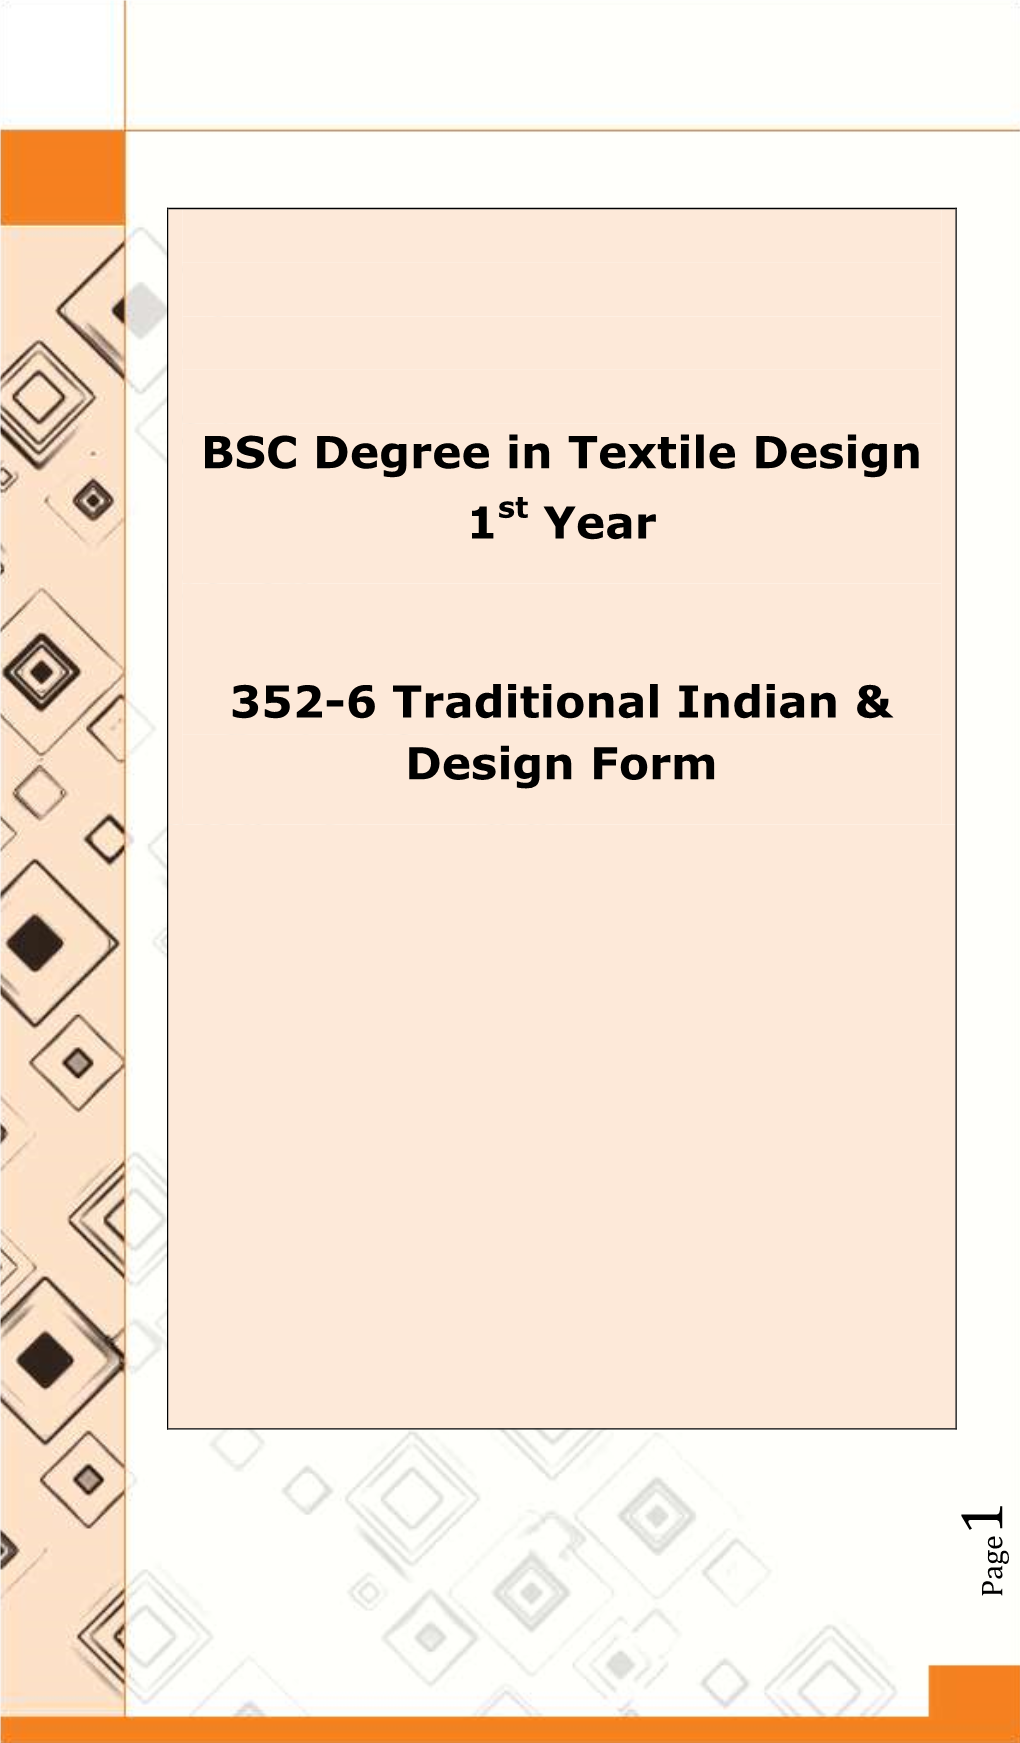 BSC Degree in Textile Design 1St Year 352-6 Traditional Indian